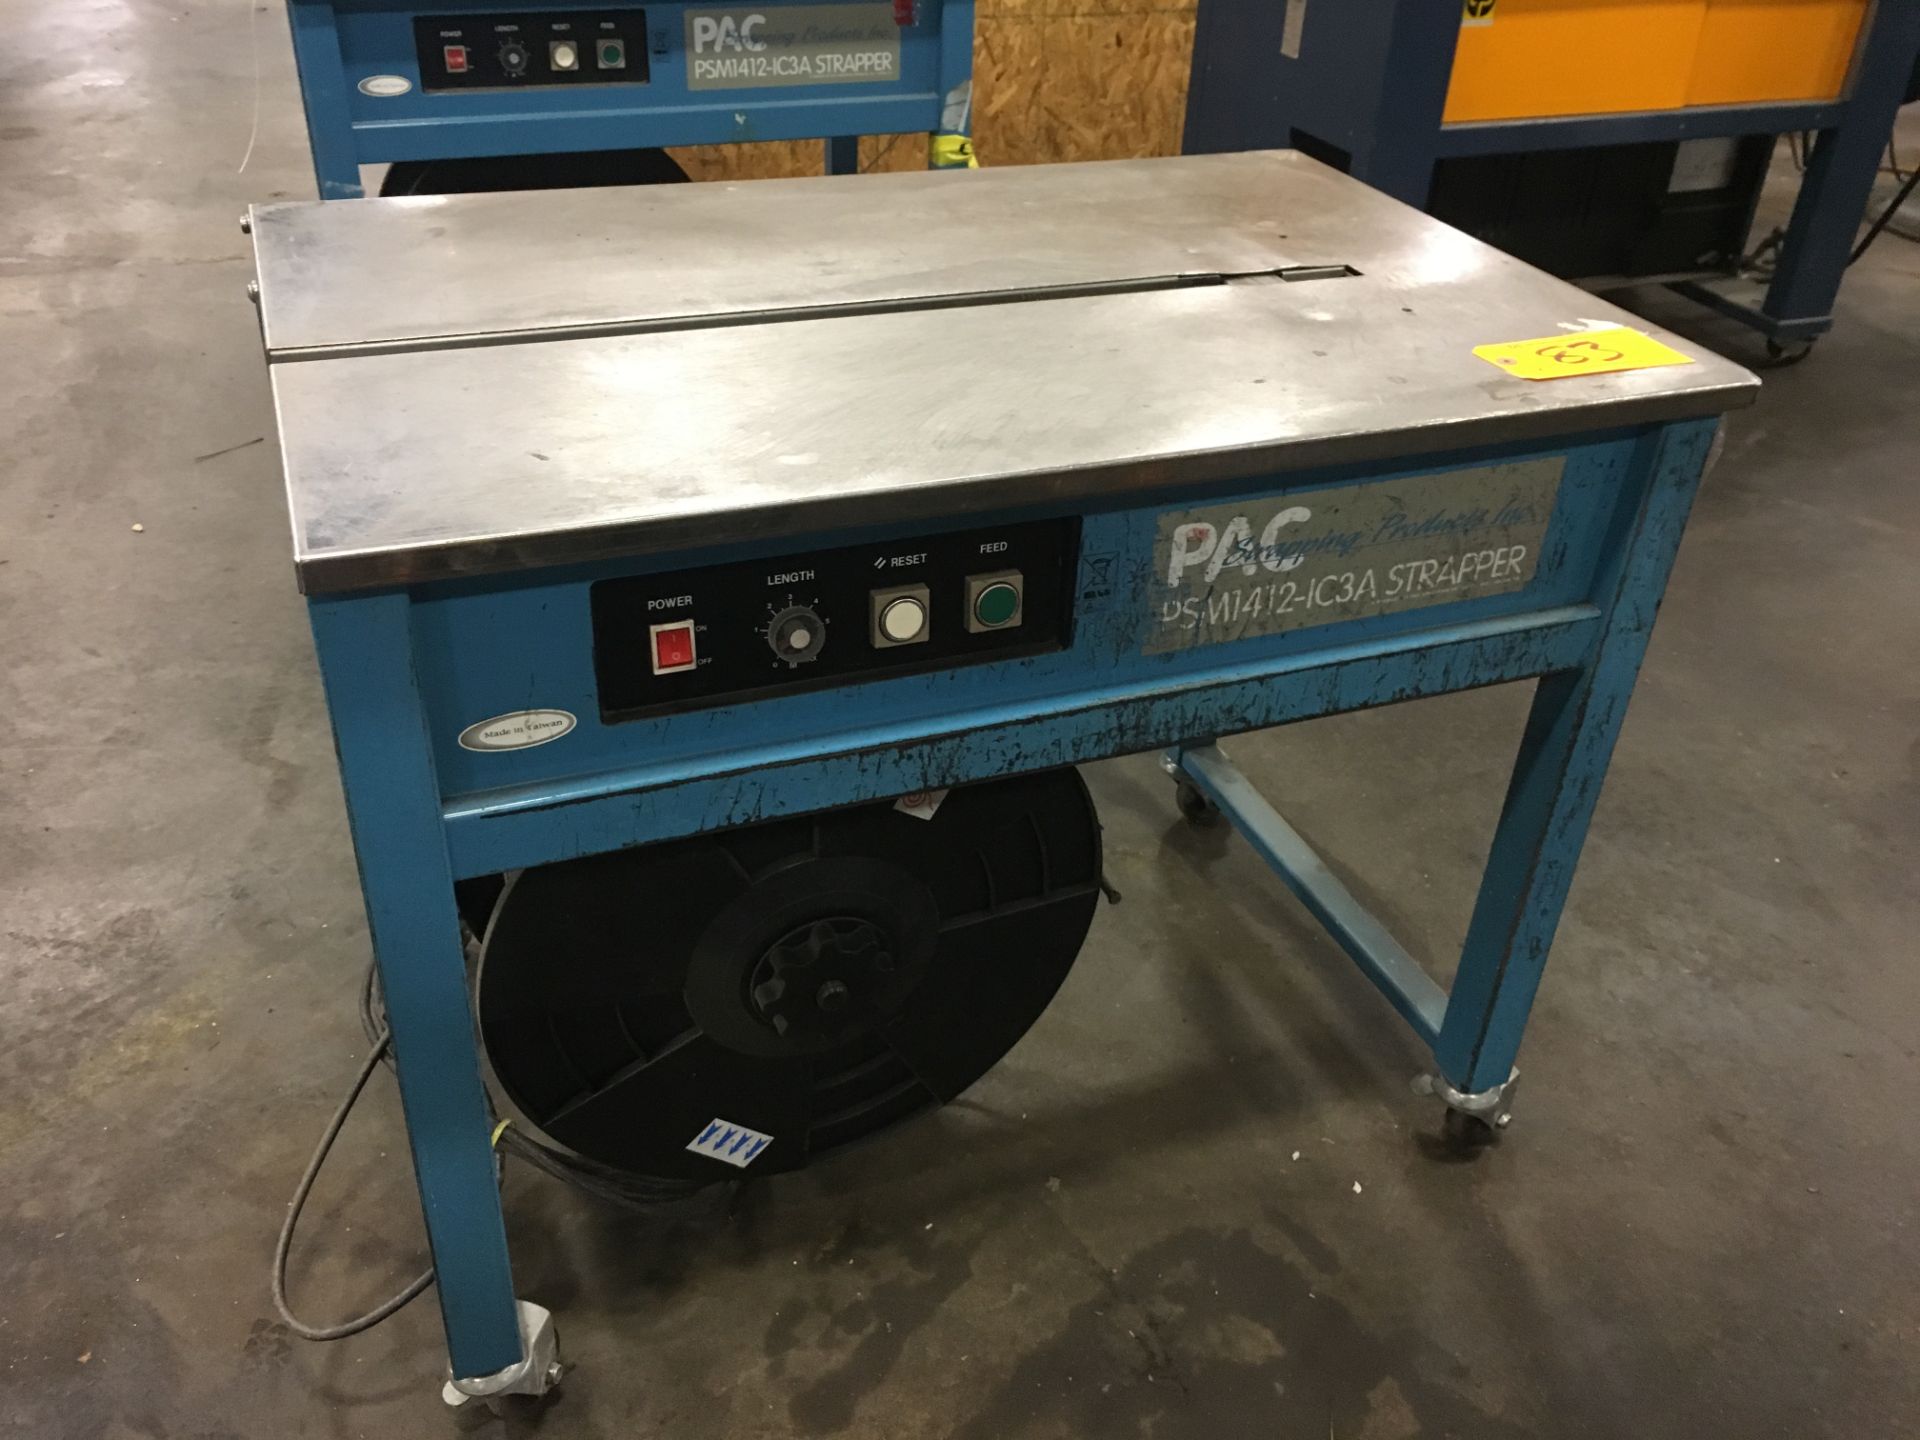 PAC Model PSM 1412-IC3A Automatic Strapper